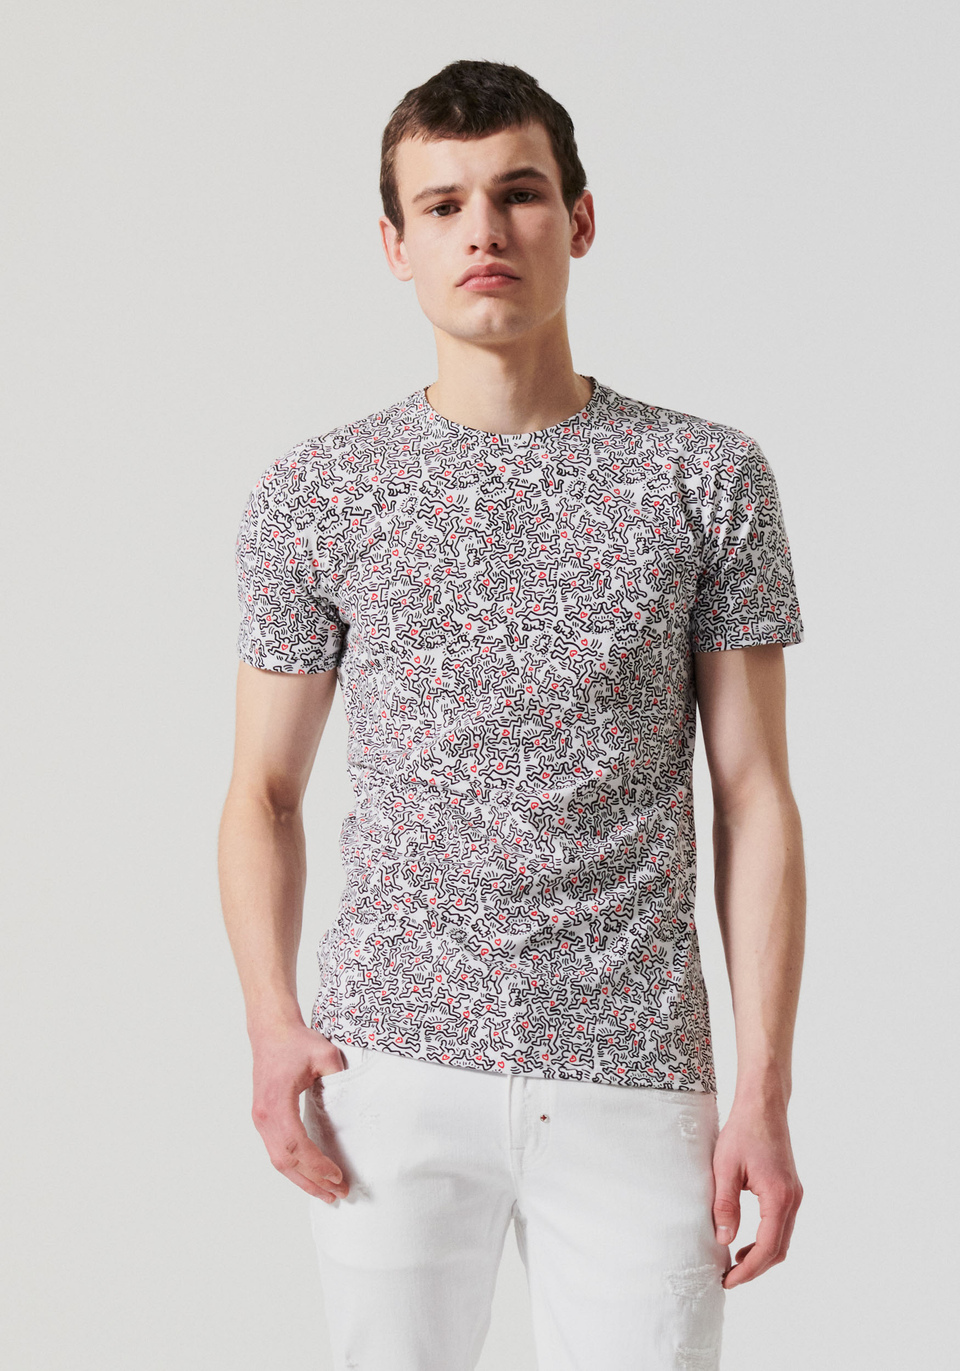 SLIM-FIT T-SHIRT WITH KEITH HARING PRINT - Antony Morato Online Shop